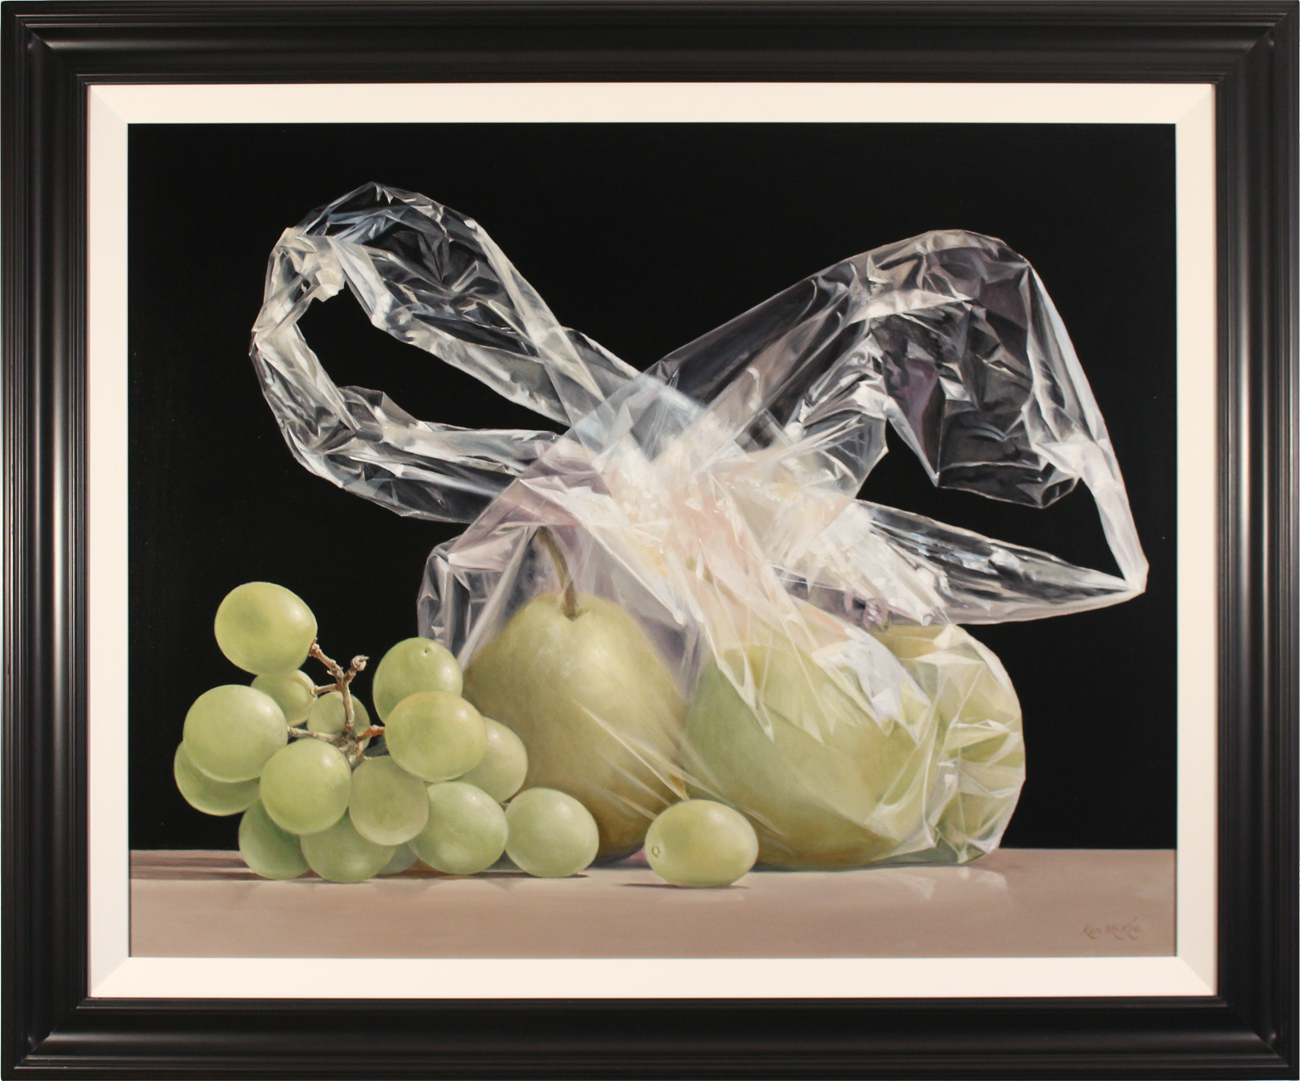 Ken Mckie, Original oil painting on canvas, Grapes and Pears. Click to enlarge